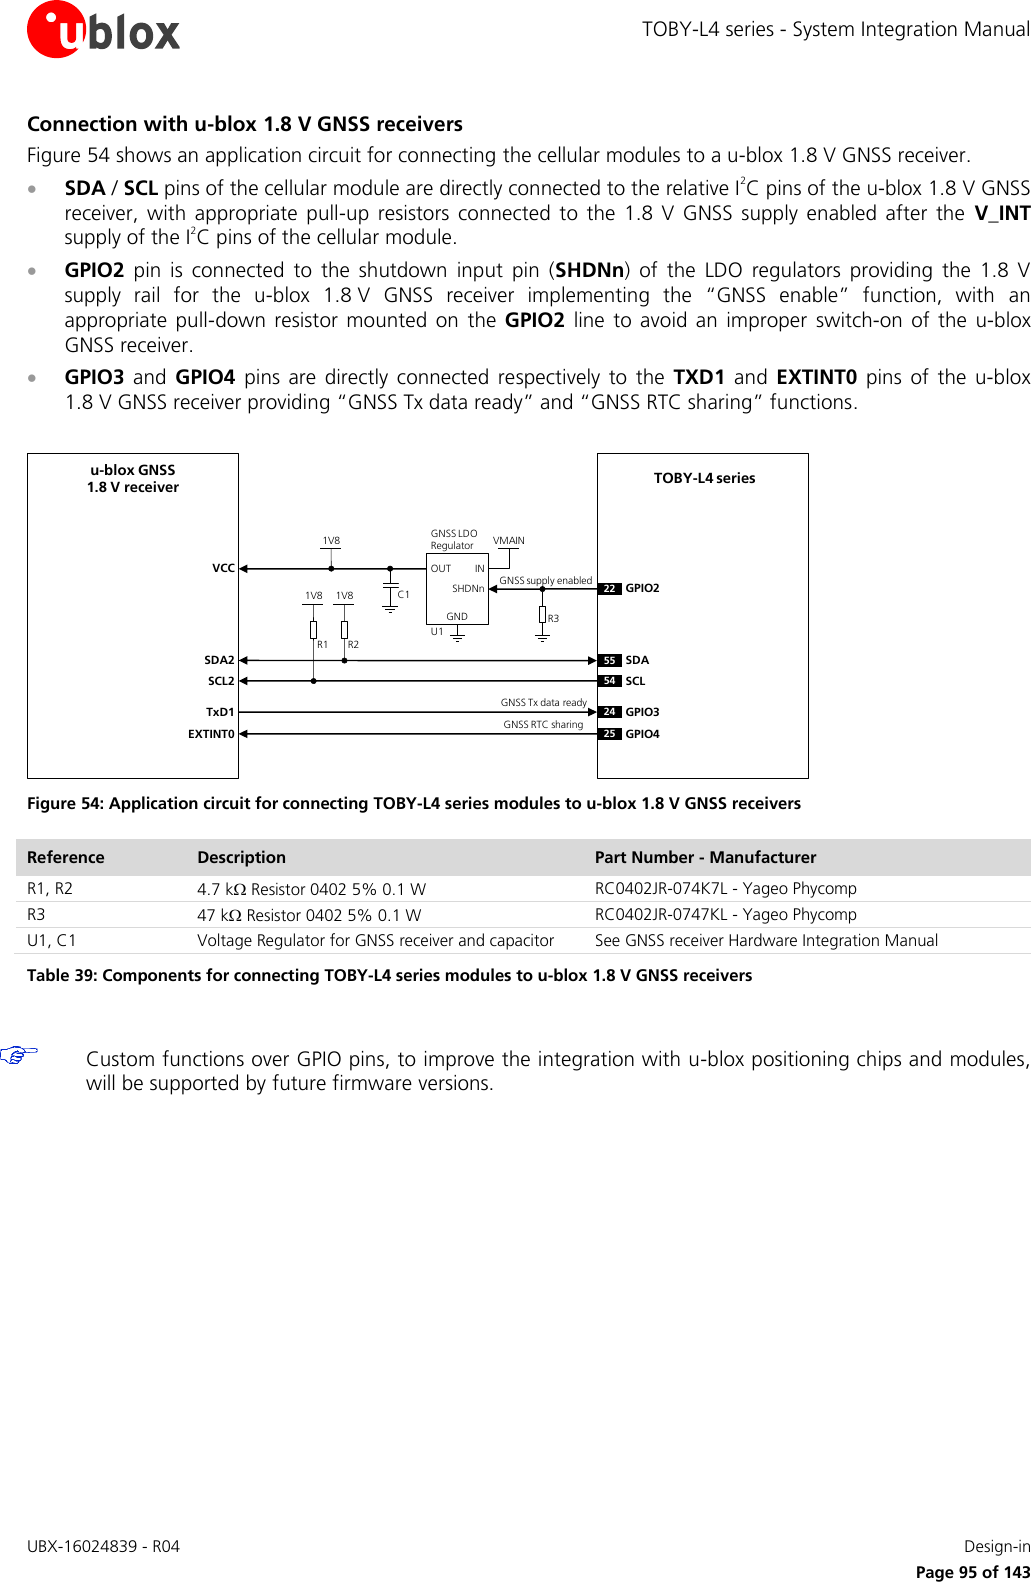 TOBY-L4 series - System Integration Manual UBX-16024839 - R04    Design-in     Page 95 of 143 Connection with u-blox 1.8 V GNSS receivers Figure 54 shows an application circuit for connecting the cellular modules to a u-blox 1.8 V GNSS receiver.  SDA / SCL pins of the cellular module are directly connected to the relative I2C pins of the u-blox 1.8 V GNSS receiver,  with  appropriate  pull-up  resistors  connected  to  the  1.8  V  GNSS  supply  enabled  after  the  V_INT supply of the I2C pins of the cellular module.  GPIO2  pin  is  connected  to  the  shutdown  input  pin  (SHDNn)  of  the  LDO  regulators  providing  the  1.8  V supply  rail  for  the  u-blox  1.8 V  GNSS  receiver  implementing  the  “GNSS  enable”  function,  with  an appropriate  pull-down resistor  mounted on  the GPIO2  line  to avoid an improper  switch-on  of the u-blox GNSS receiver.  GPIO3  and  GPIO4  pins  are  directly  connected  respectively  to  the  TXD1  and  EXTINT0  pins  of the  u-blox 1.8 V GNSS receiver providing “GNSS Tx data ready” and “GNSS RTC sharing” functions.  R1INOUTGNDGNSS LDORegulatorSHDNnu-blox GNSS1.8 V receiverSDA2SCL2R21V8 1V8VMAIN1V8U122 GPIO2SDASCLC1TxD1 GPIO3555424VCCR3GNSS Tx data readyGNSS supply enabledTOBY-L4 seriesEXTINT0 GPIO425GNSS RTC sharing Figure 54: Application circuit for connecting TOBY-L4 series modules to u-blox 1.8 V GNSS receivers Reference Description Part Number - Manufacturer R1, R2 4.7 k Resistor 0402 5% 0.1 W  RC0402JR-074K7L - Yageo Phycomp R3 47 k Resistor 0402 5% 0.1 W  RC0402JR-0747KL - Yageo Phycomp U1, C1 Voltage Regulator for GNSS receiver and capacitor See GNSS receiver Hardware Integration Manual Table 39: Components for connecting TOBY-L4 series modules to u-blox 1.8 V GNSS receivers   Custom functions over GPIO pins, to improve the integration with u-blox positioning chips and modules, will be supported by future firmware versions.   